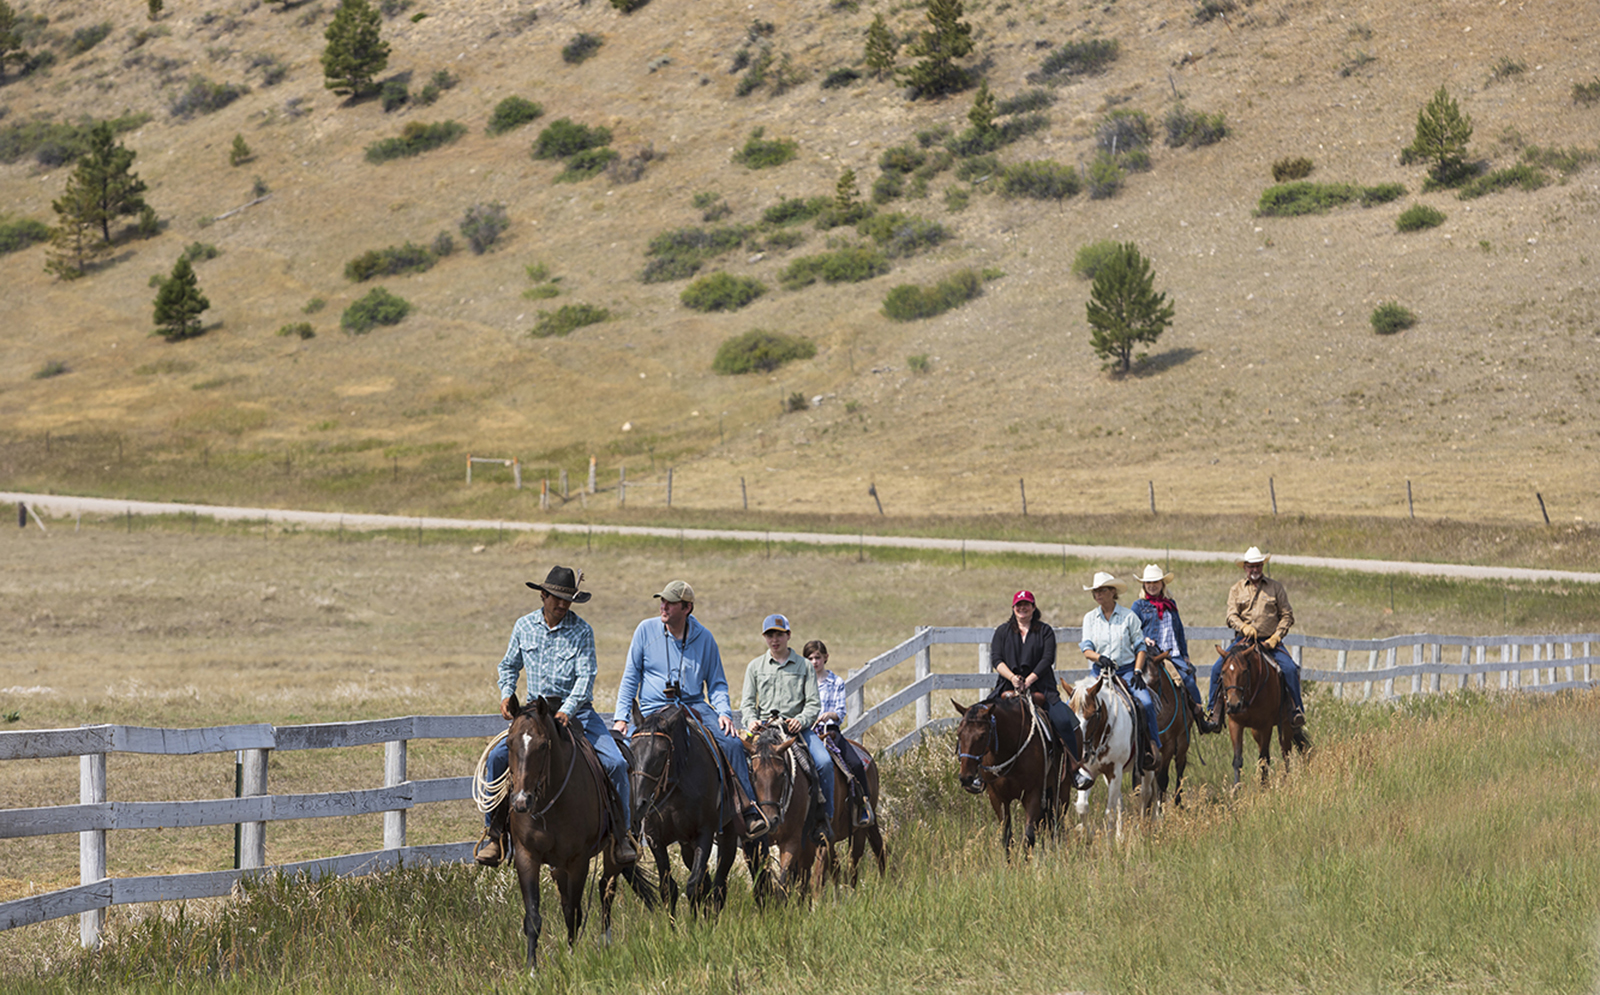 A group of horseback riders during their Montana dude ranch vacation.